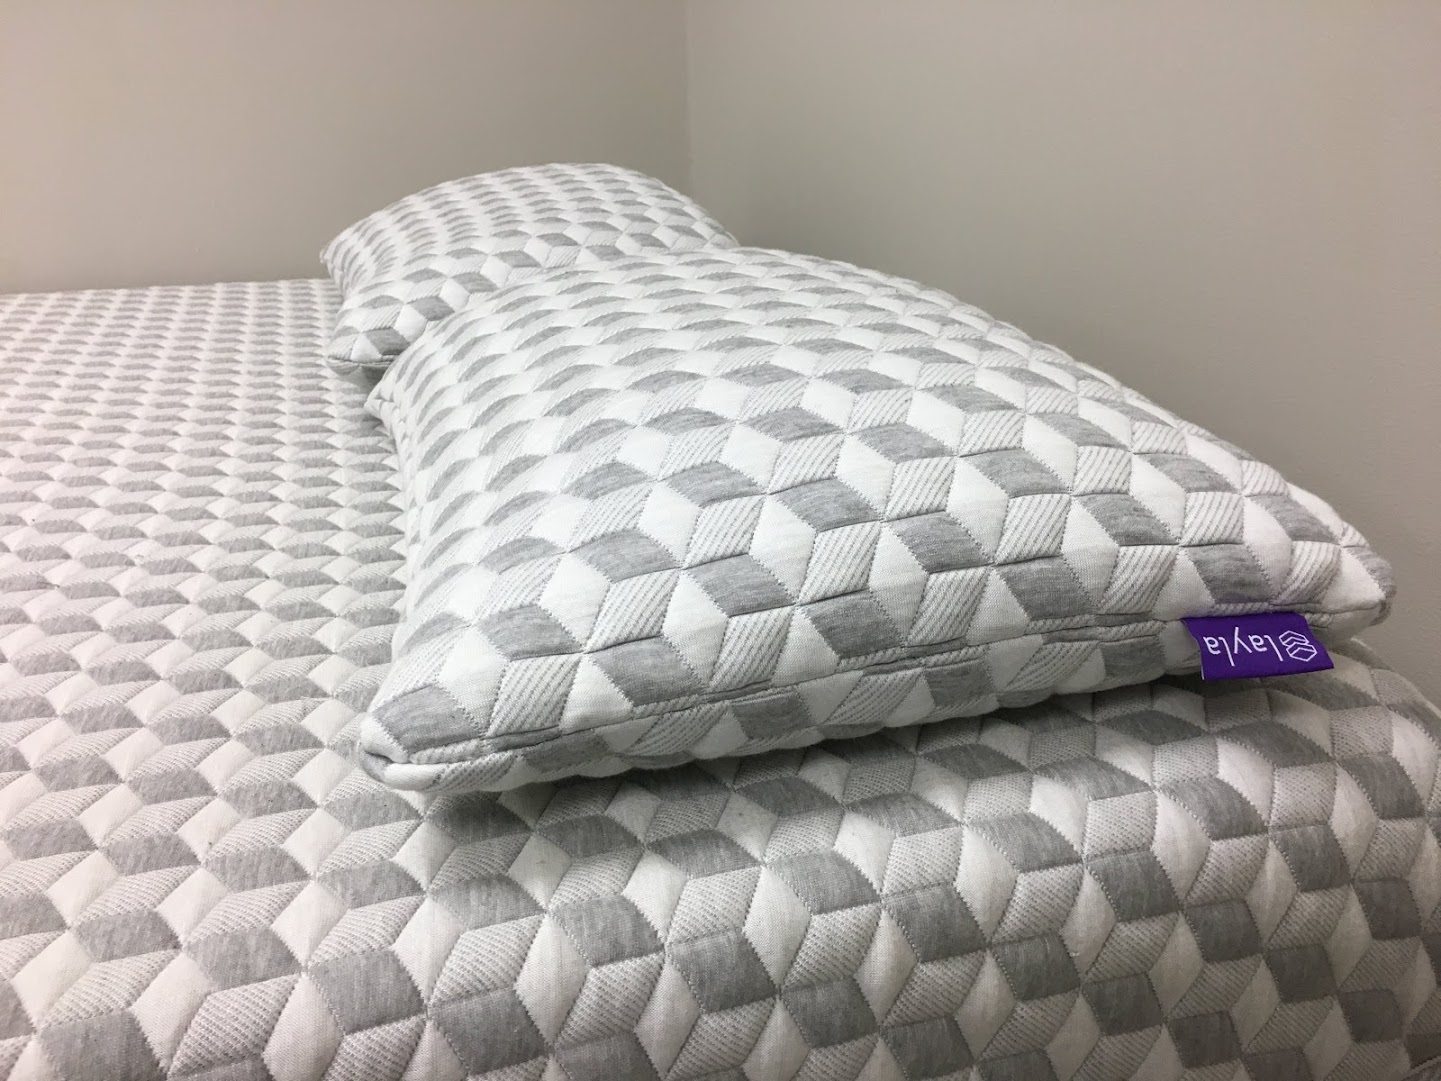 Layla Pillow Review, Here's What To Expect - Yawnder